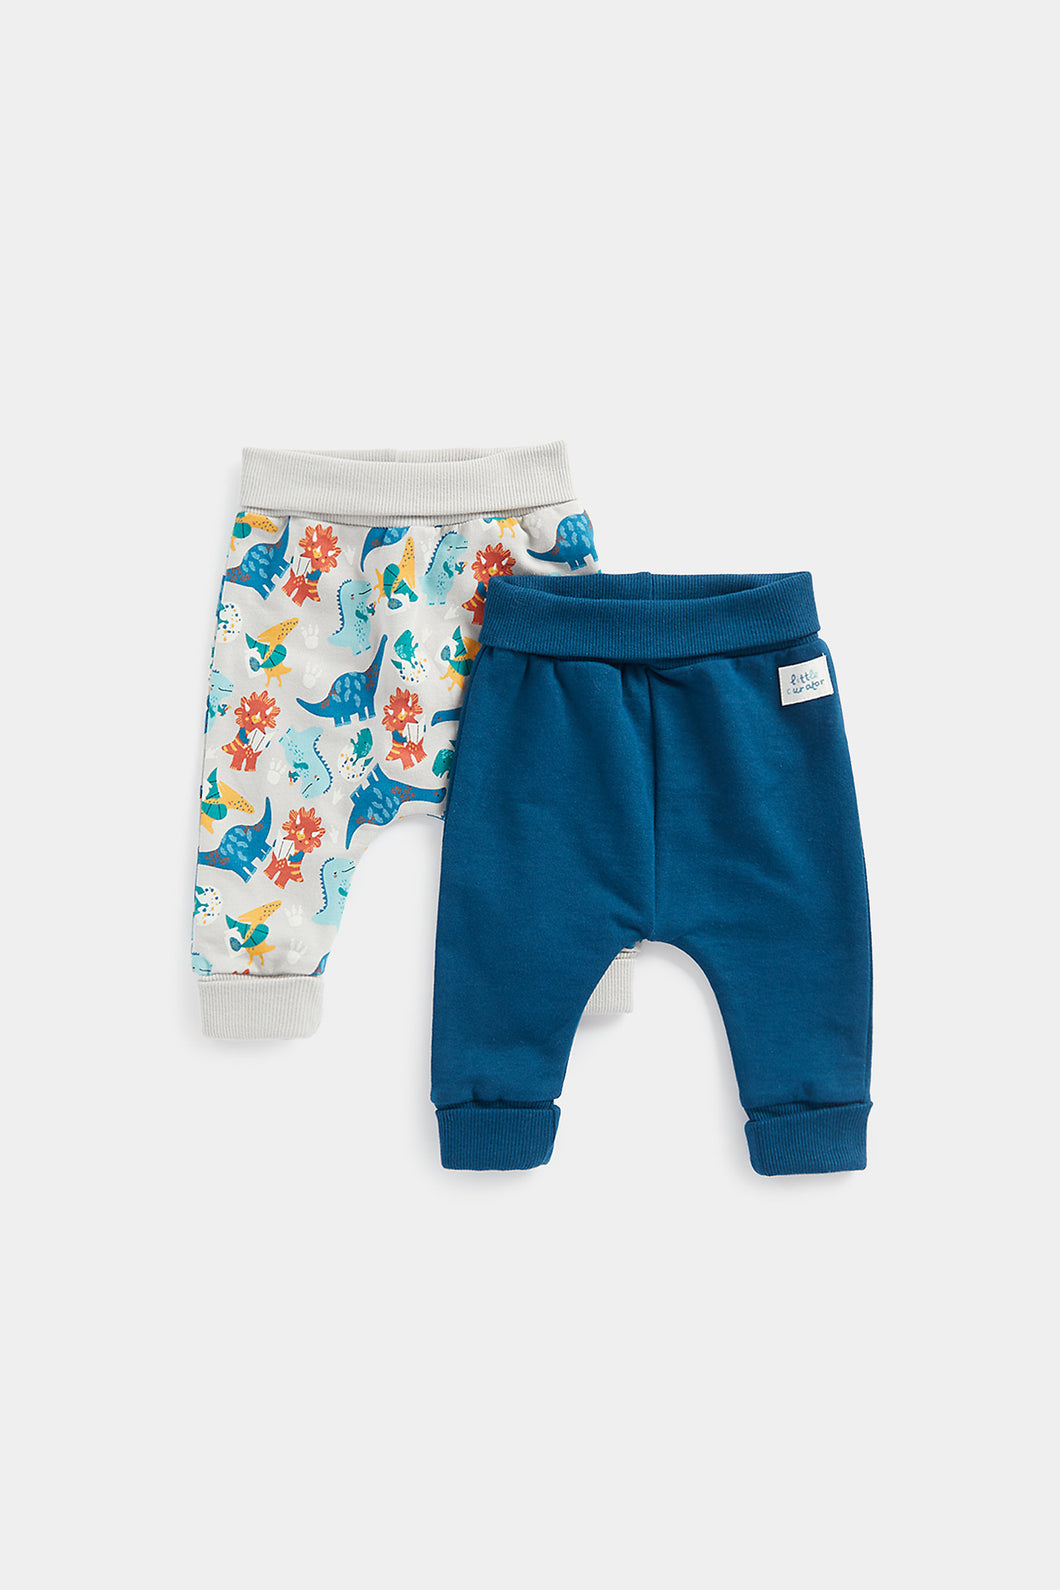 Mothercare Dinosaur Joggers - 2 Pack